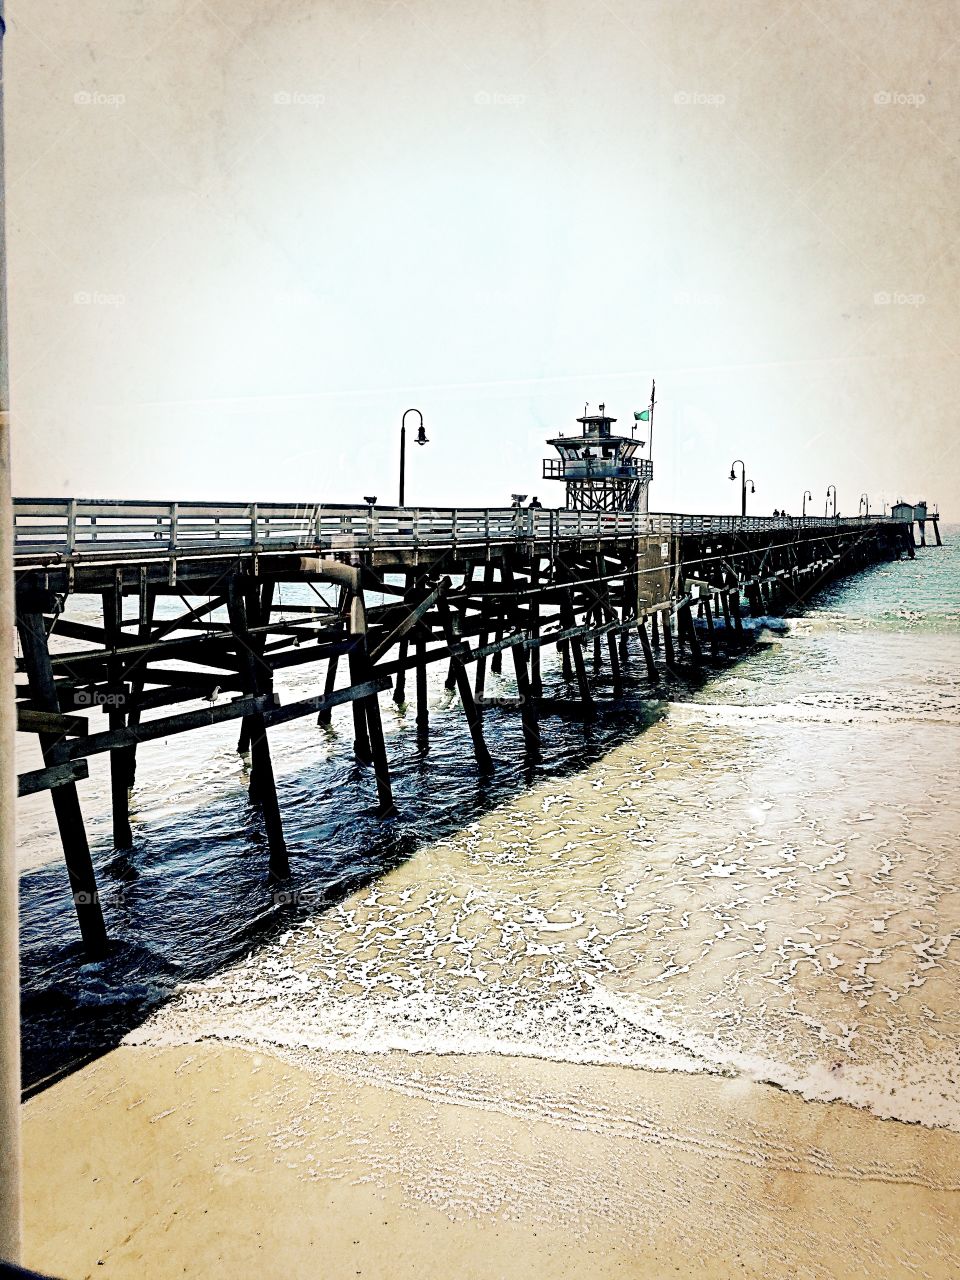 San Clemente Pier. View of San Clemente Pier in Southern California.